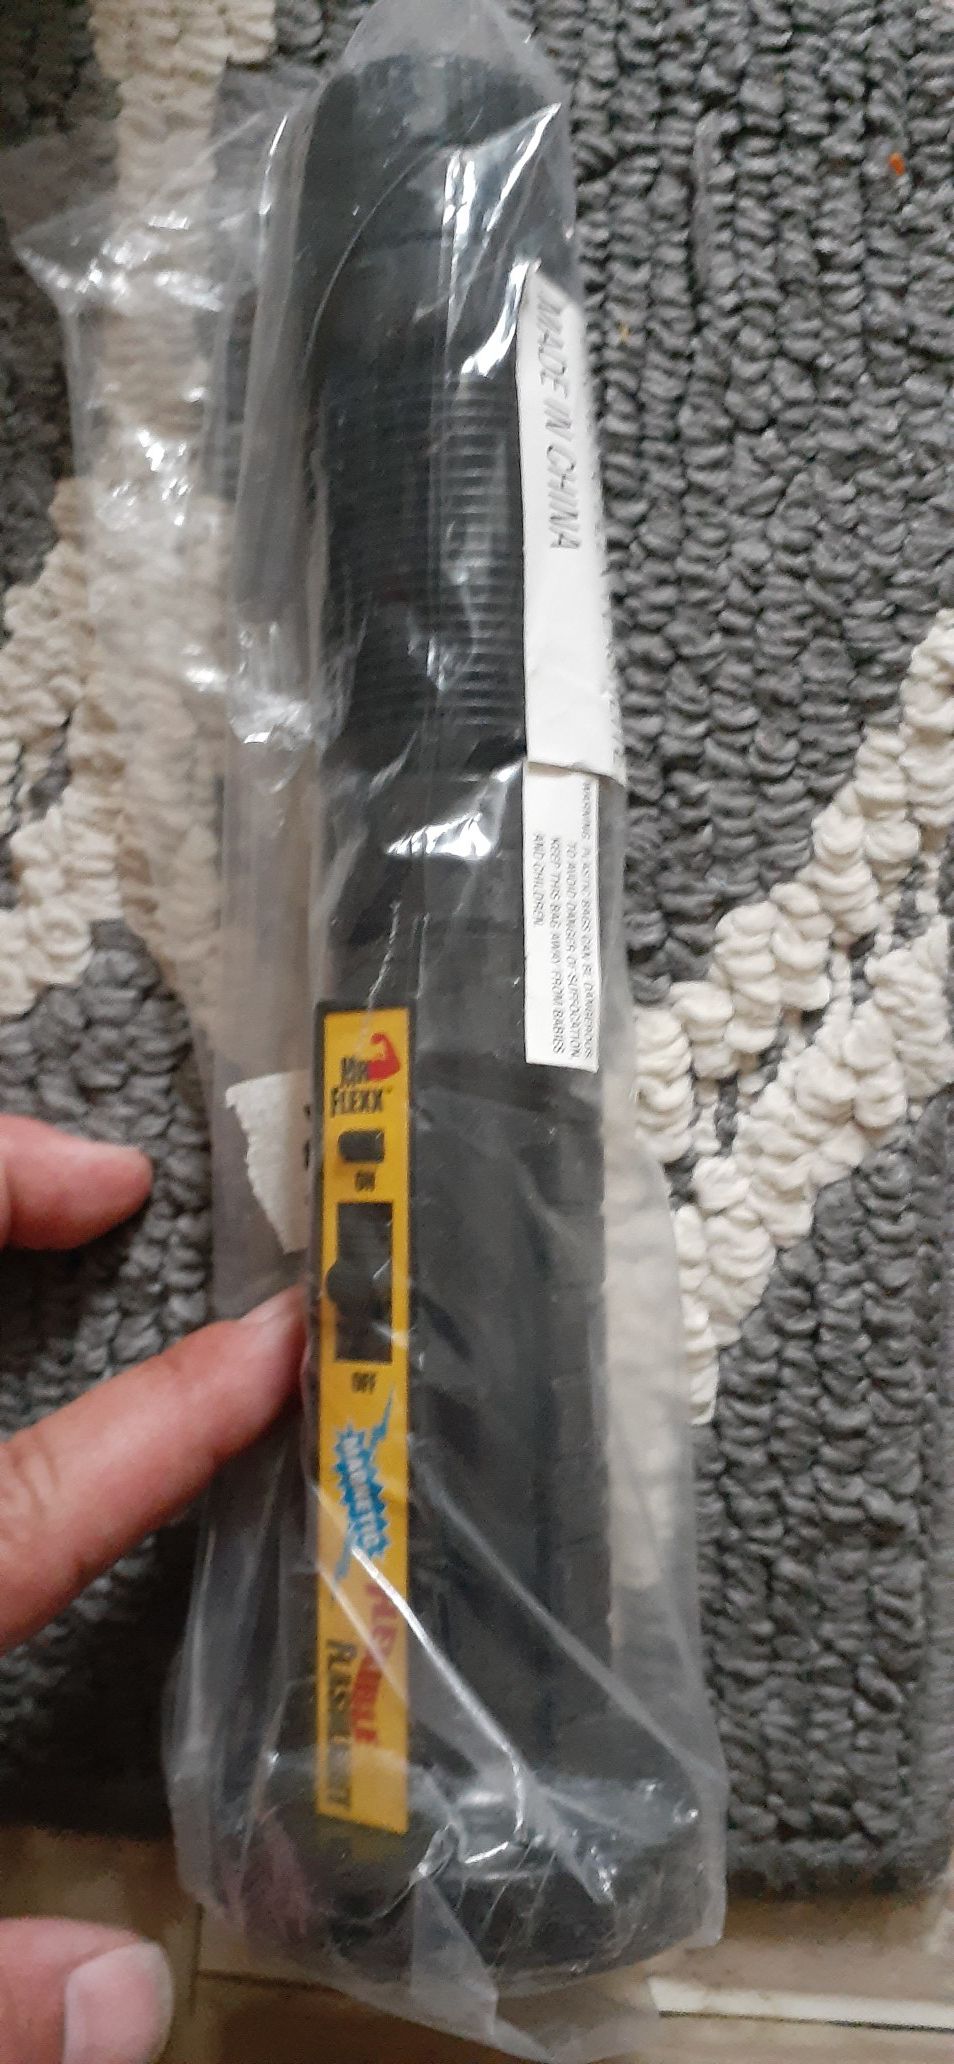 Flexible flashlight New shipping available with offerup